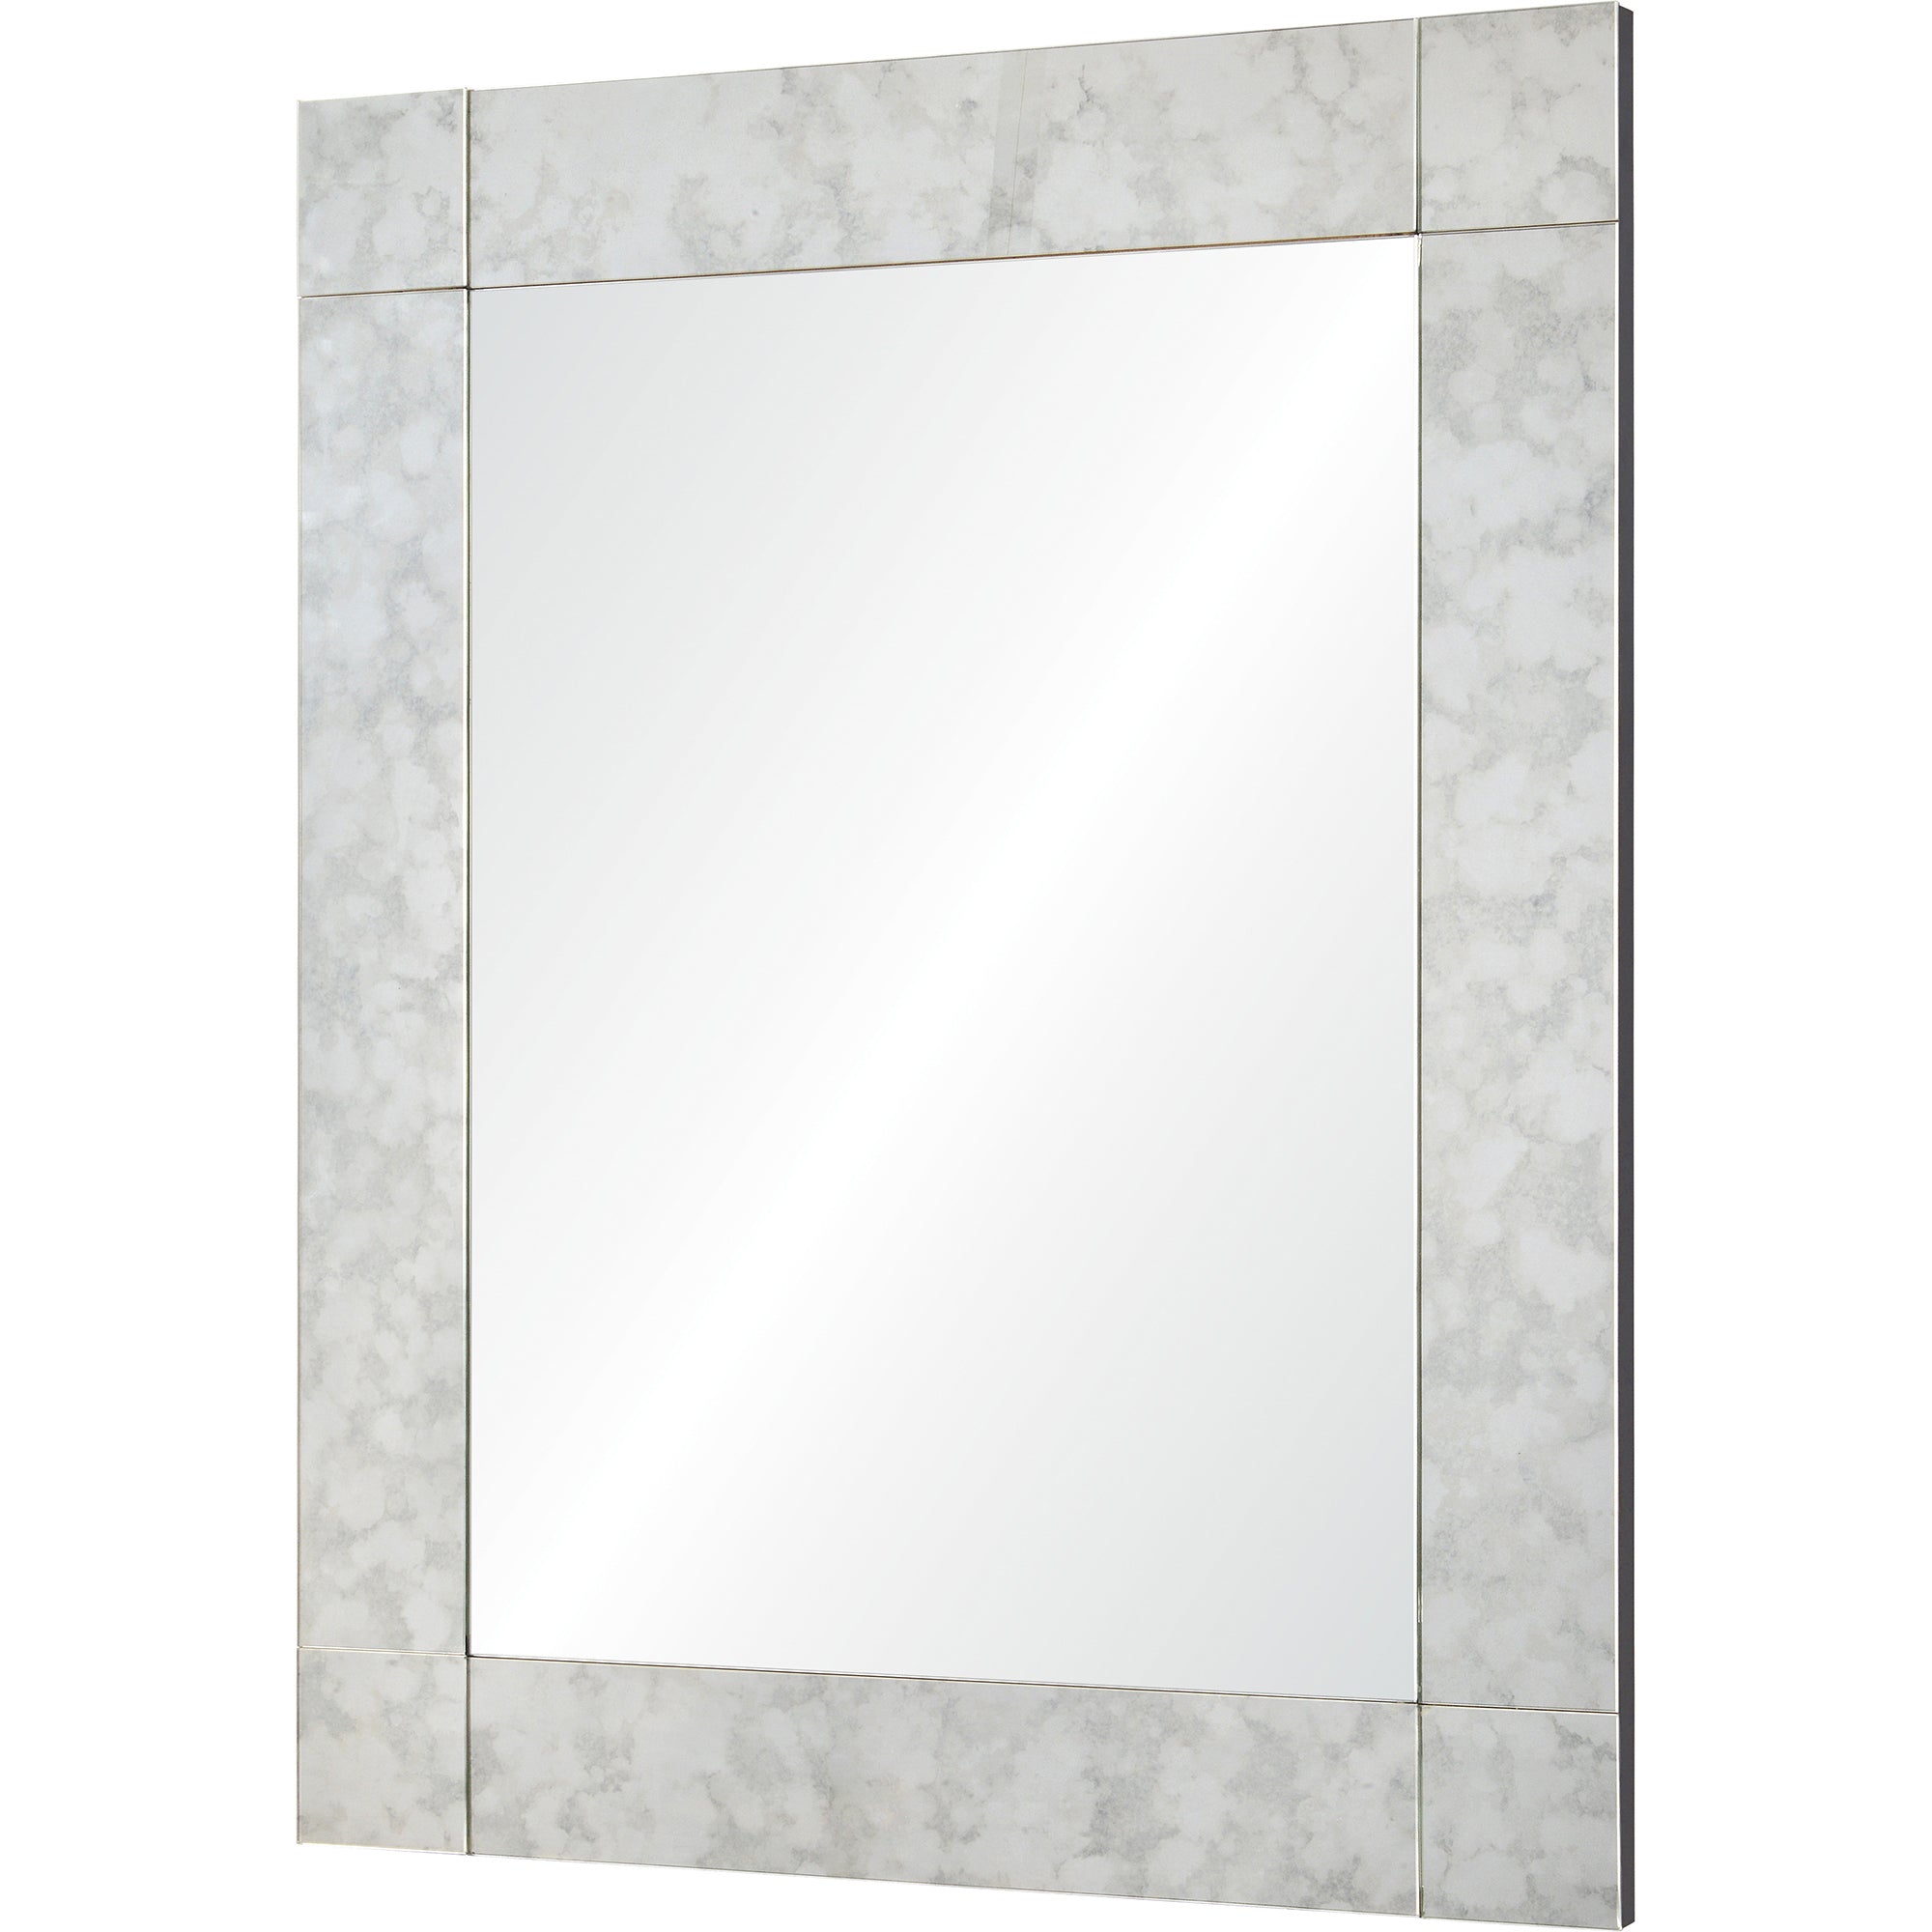 Connor 40" Polished Glass - Antique Tinted Mirror